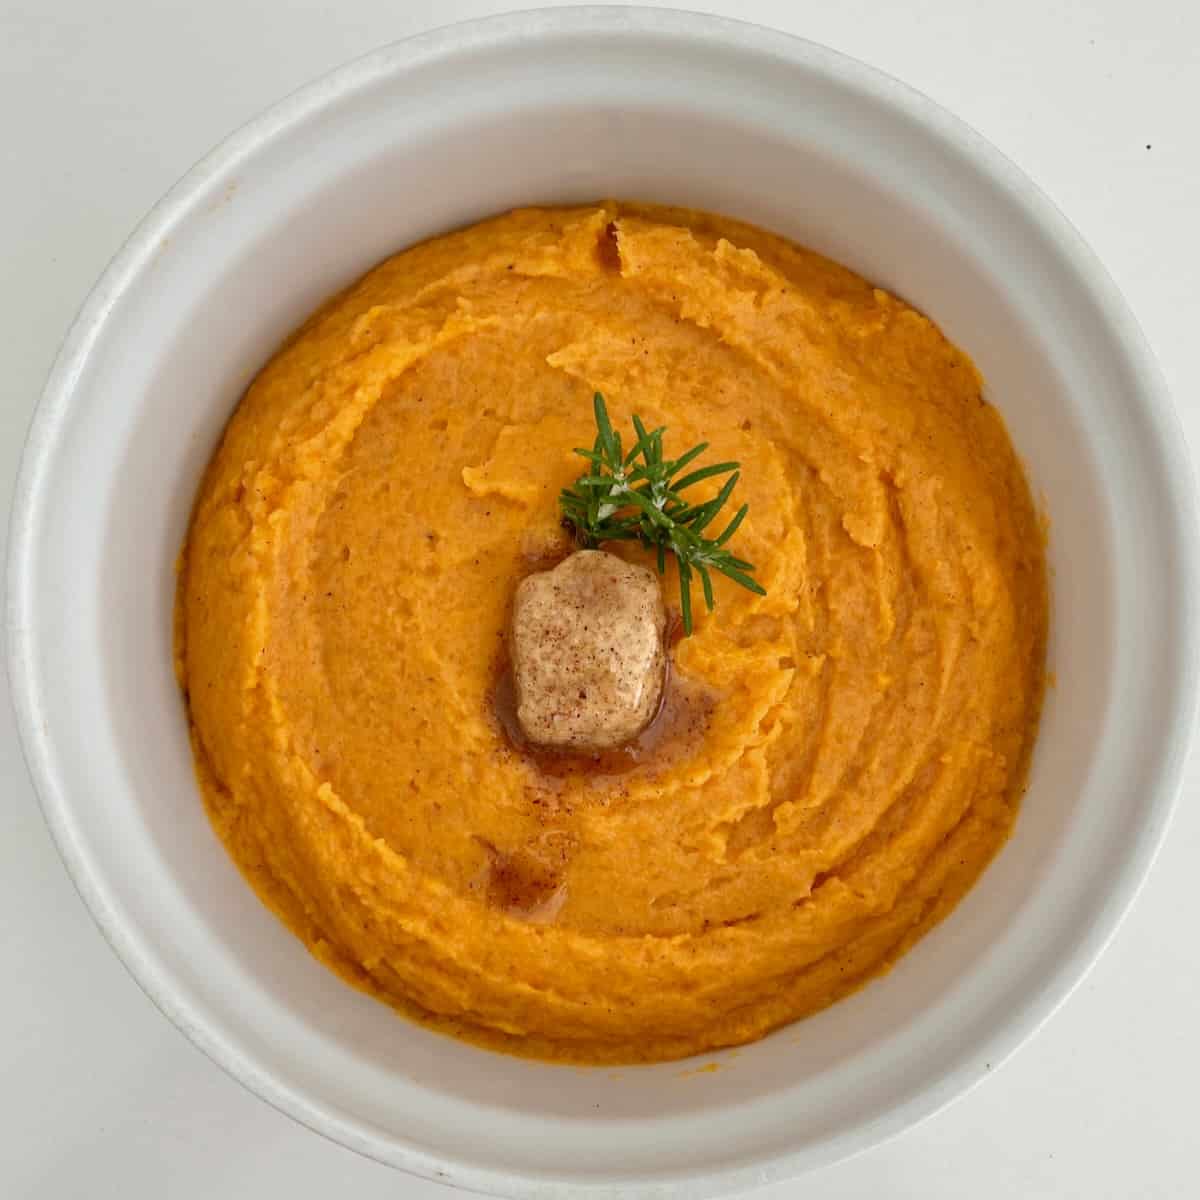 Mashed sweet potatoes topped with butter and rosemary in a bowl